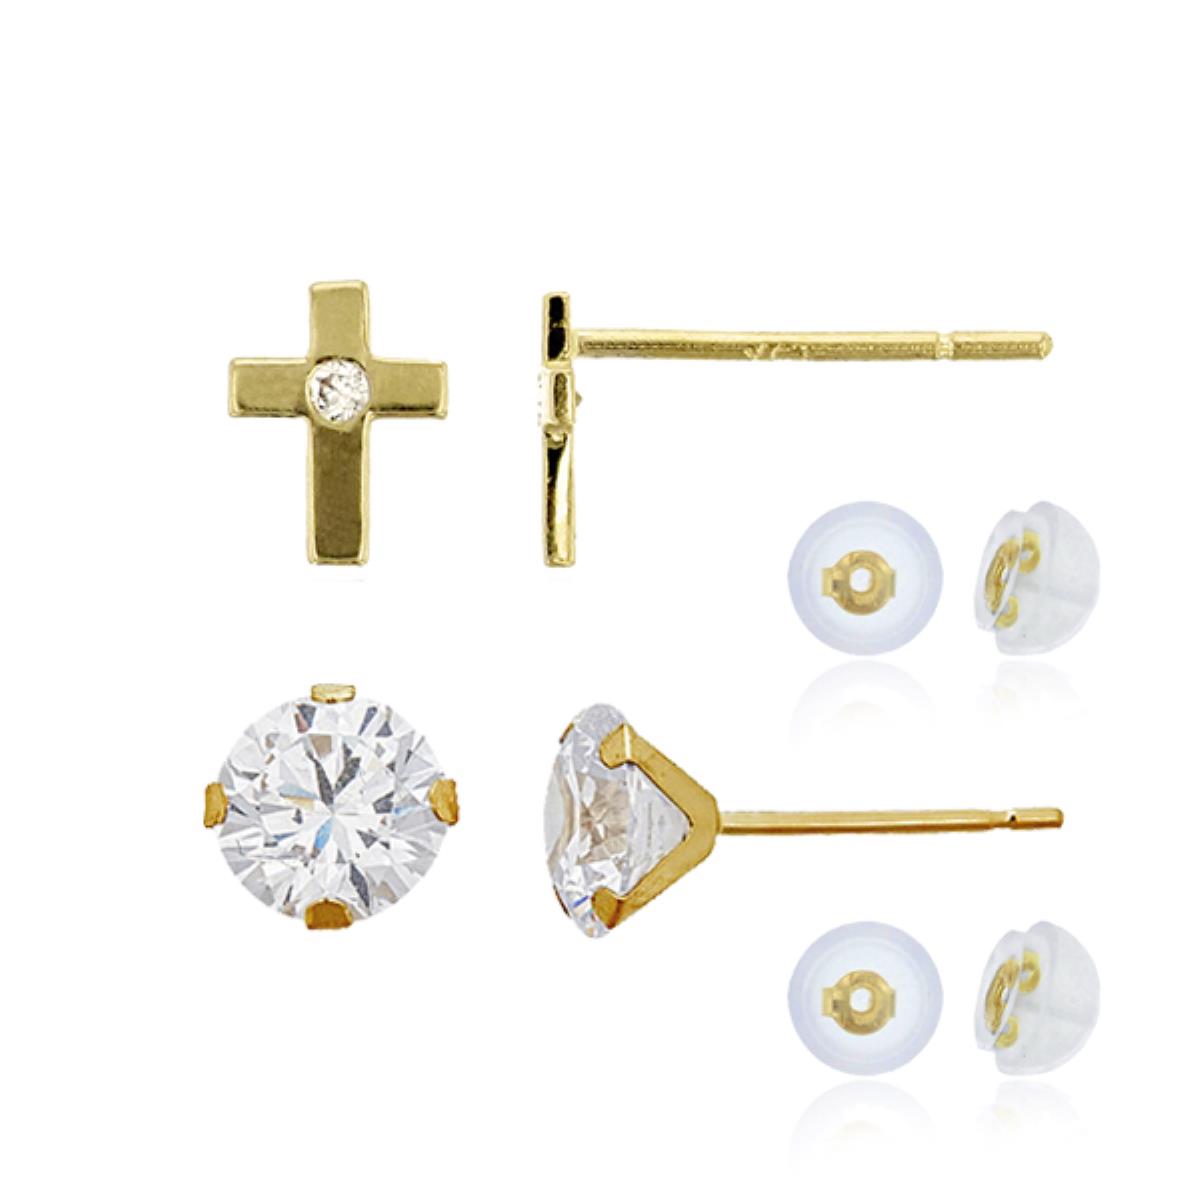 14K Yellow Gold Polished Pave Mini Cross & 6mm Rd Martini Solitaire Stud Earring Set